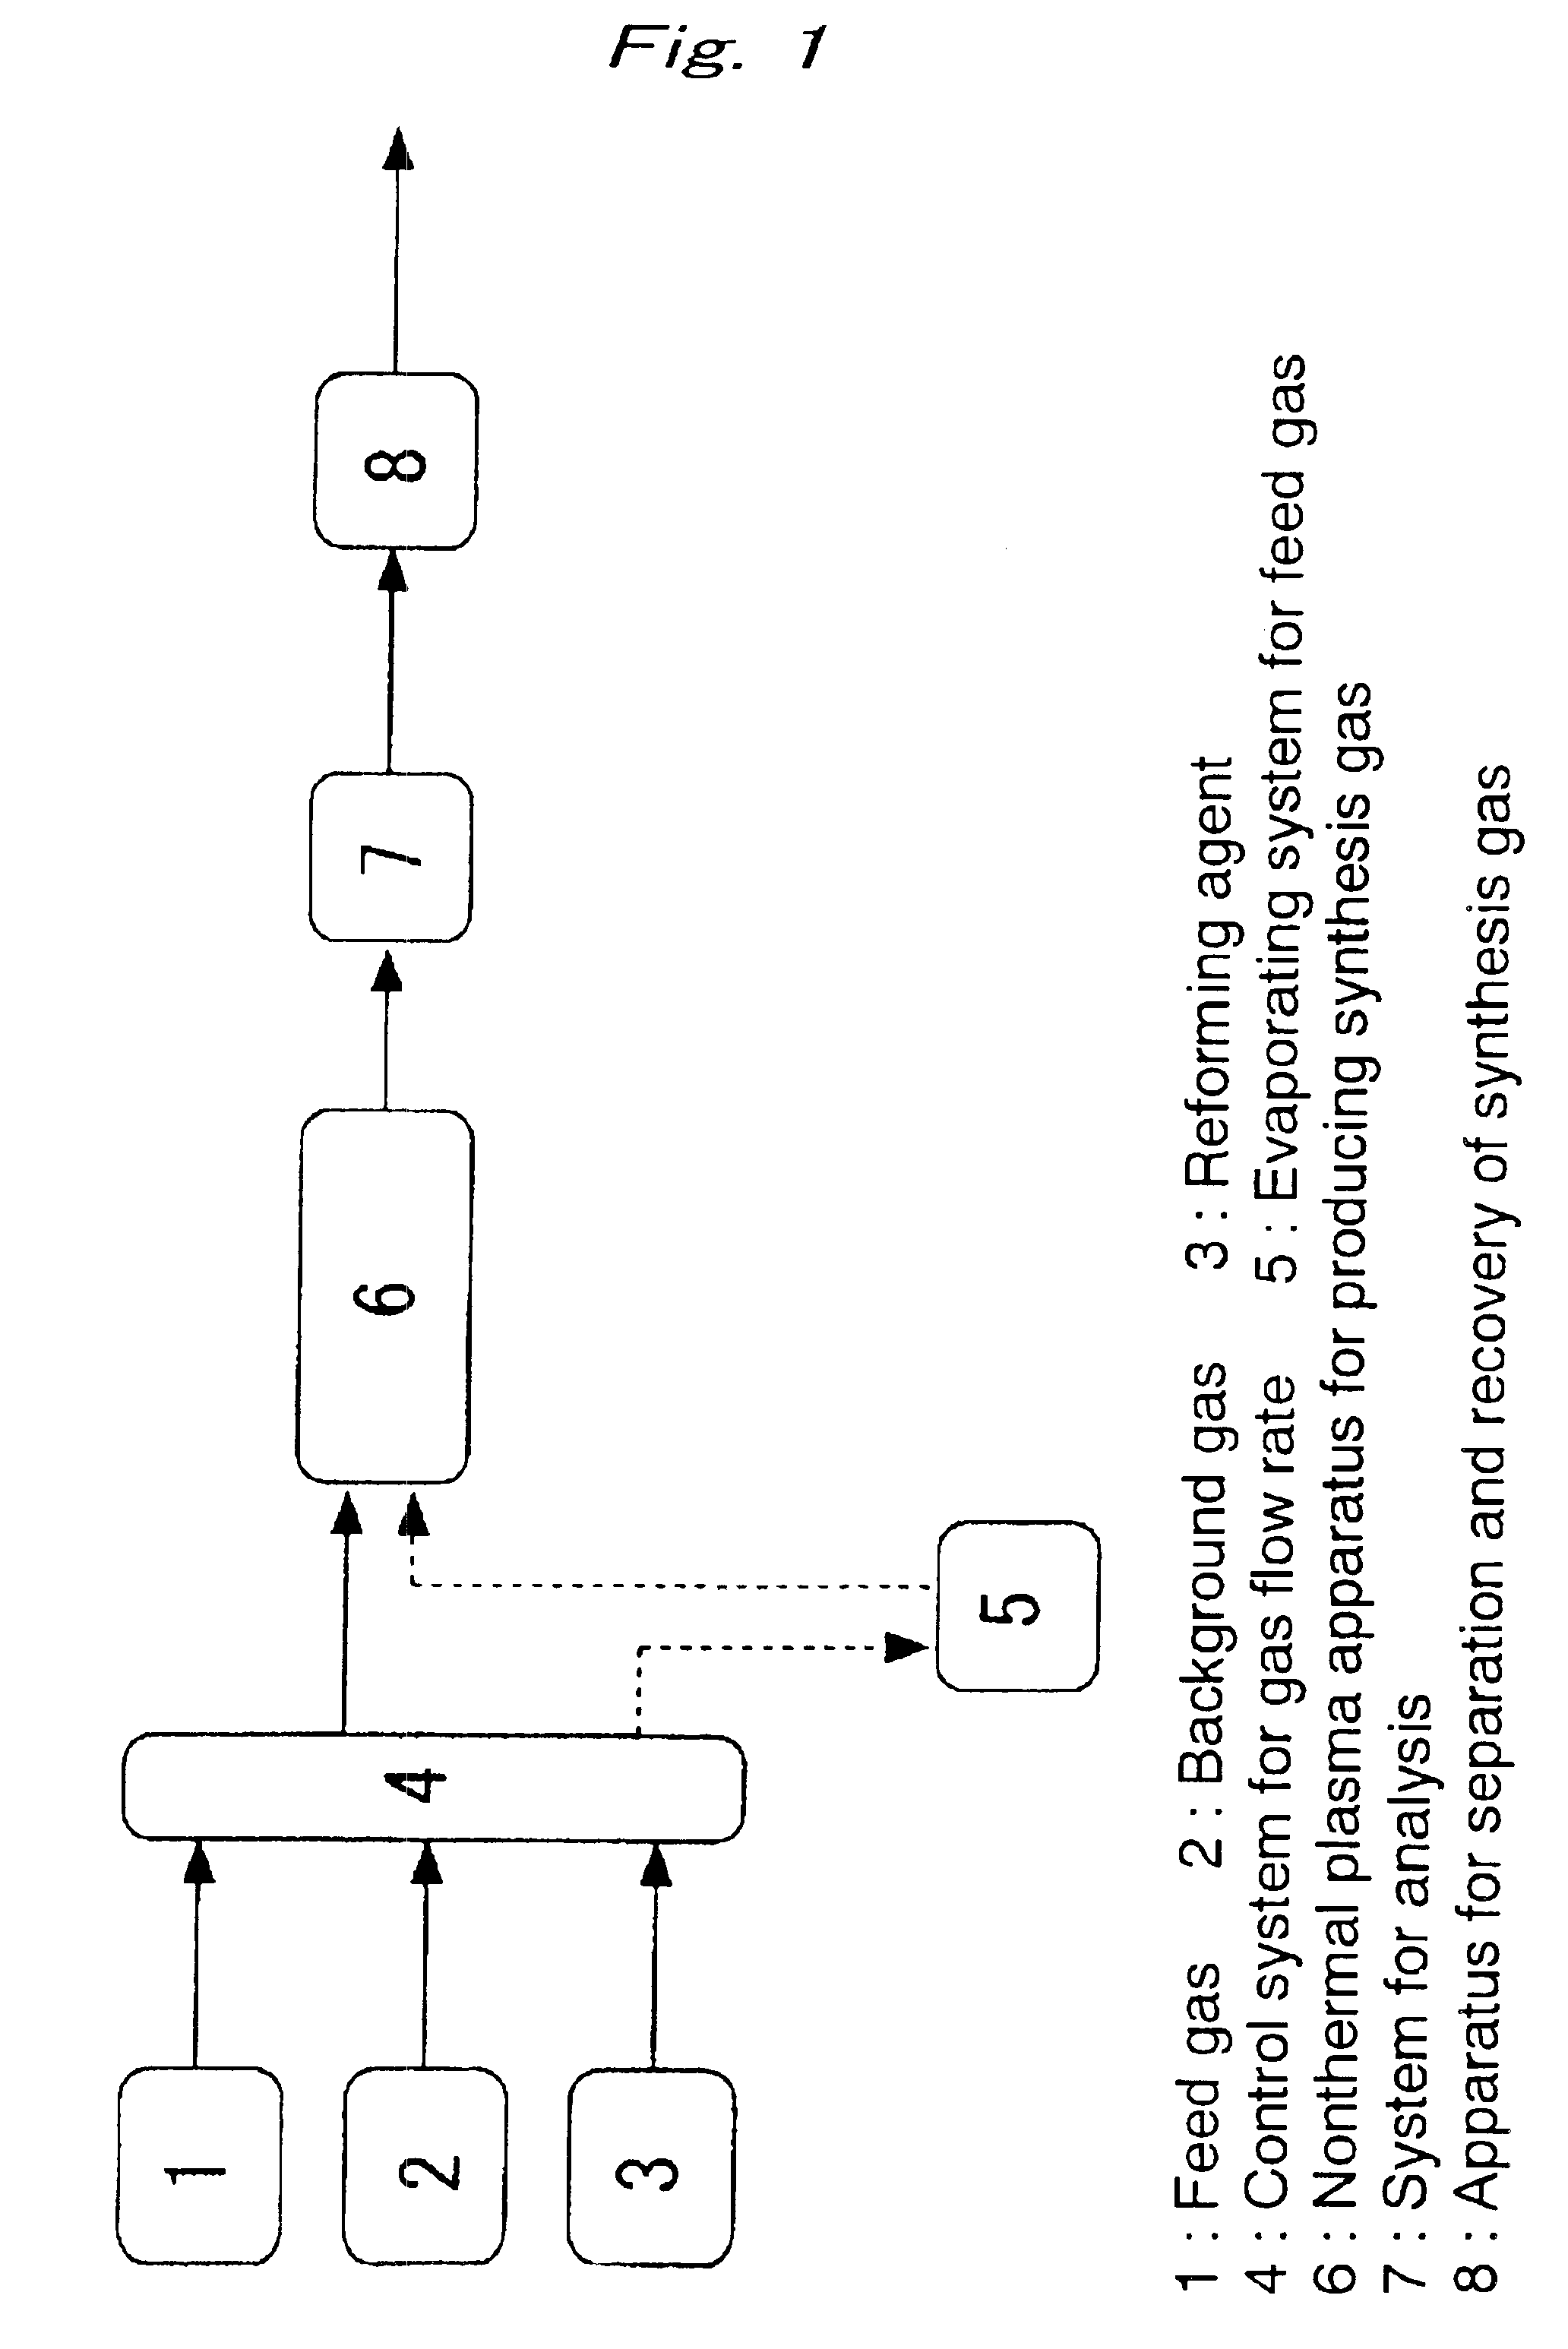 Process for production of hydrogen using nonthermal plasma